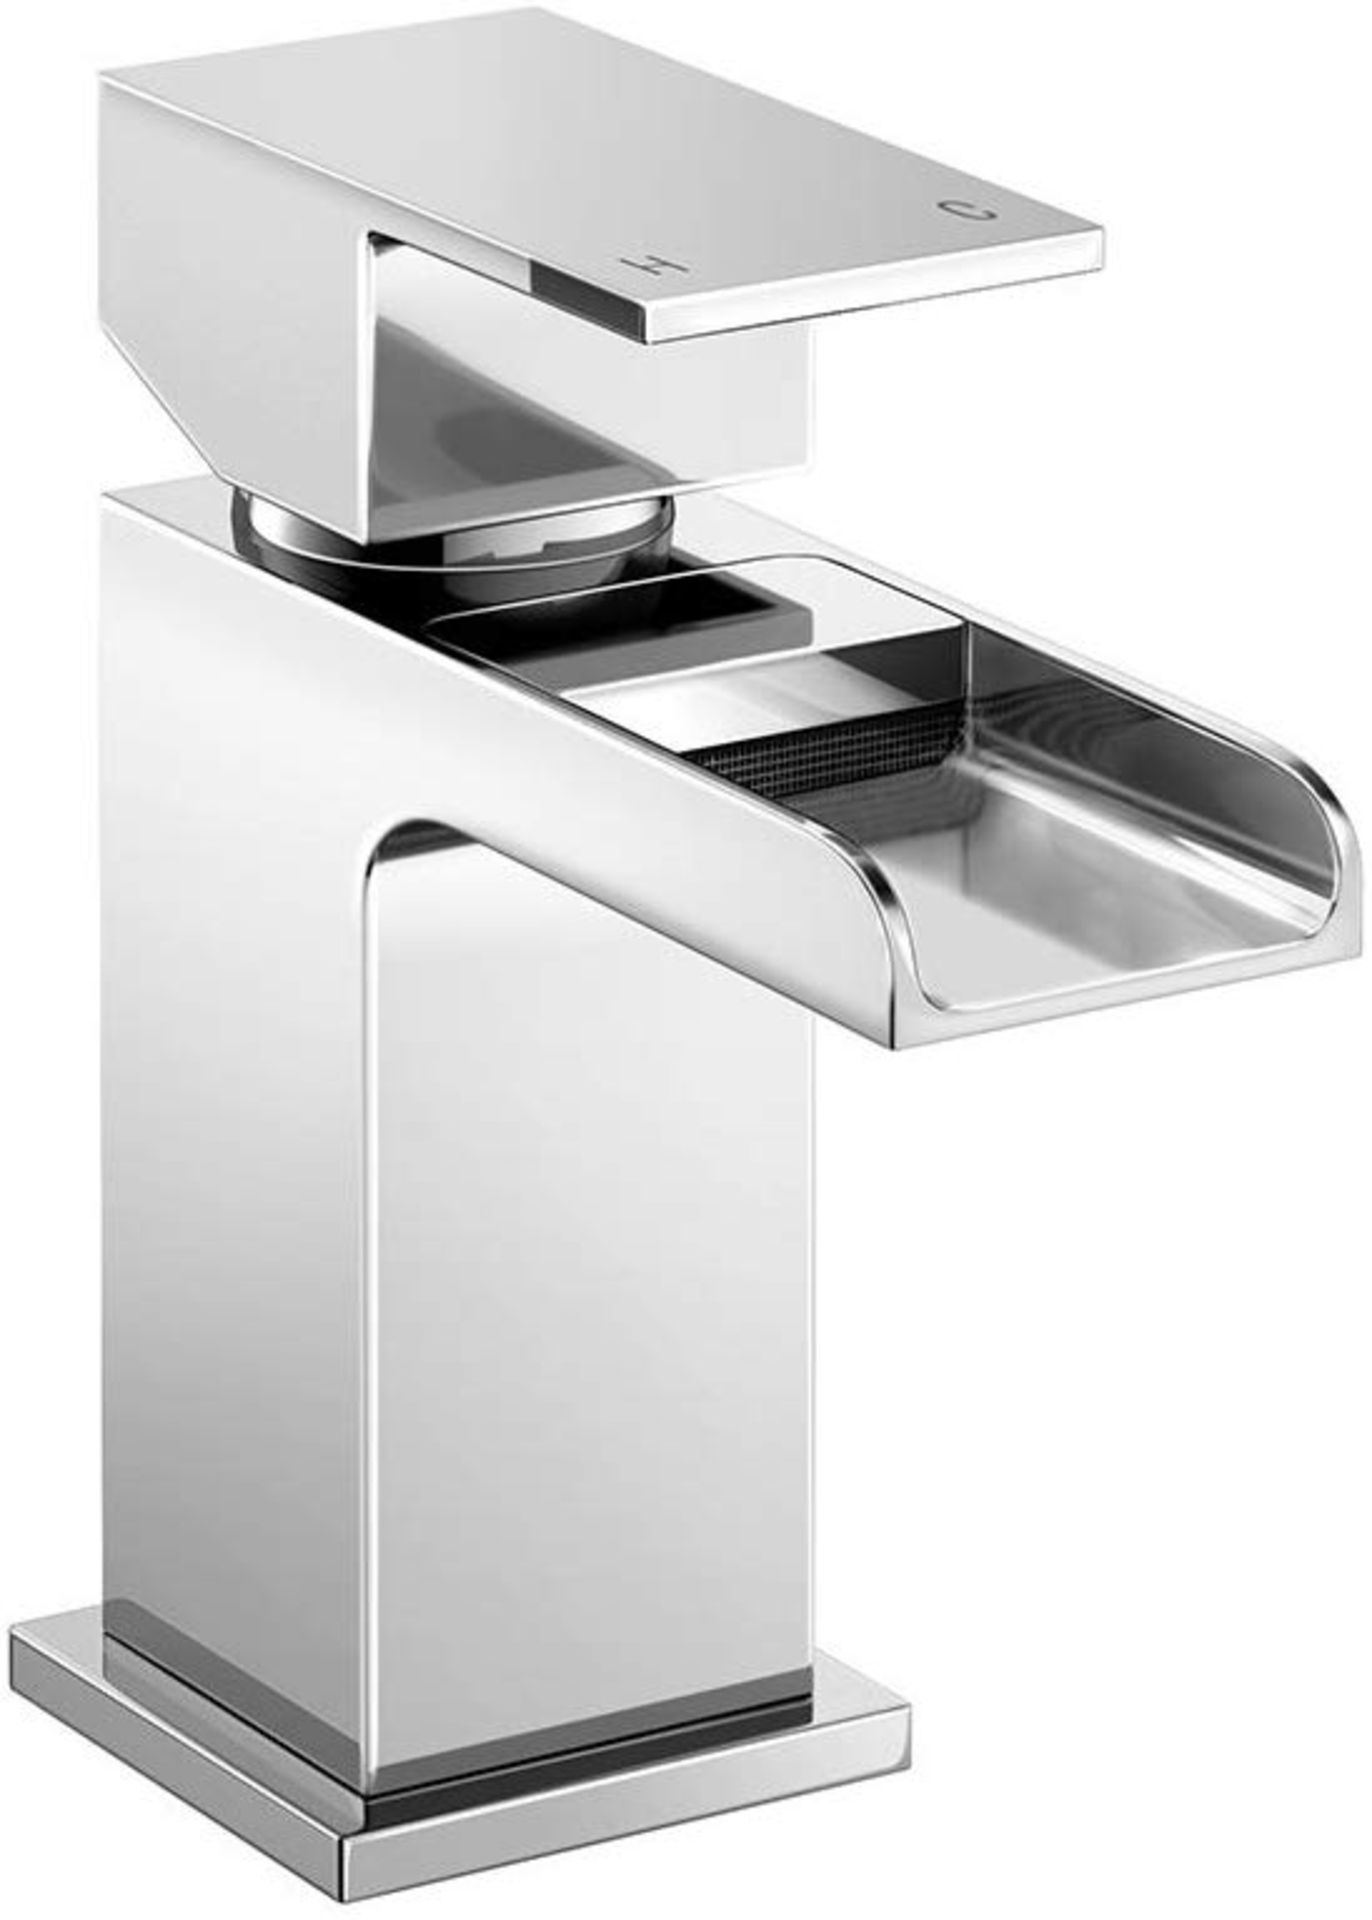 (AA1005) Modern Waterfall Cloakroom Basin Mixer Tap Chrome Bathroom Sink. Chrome plated solid b... - Image 3 of 3